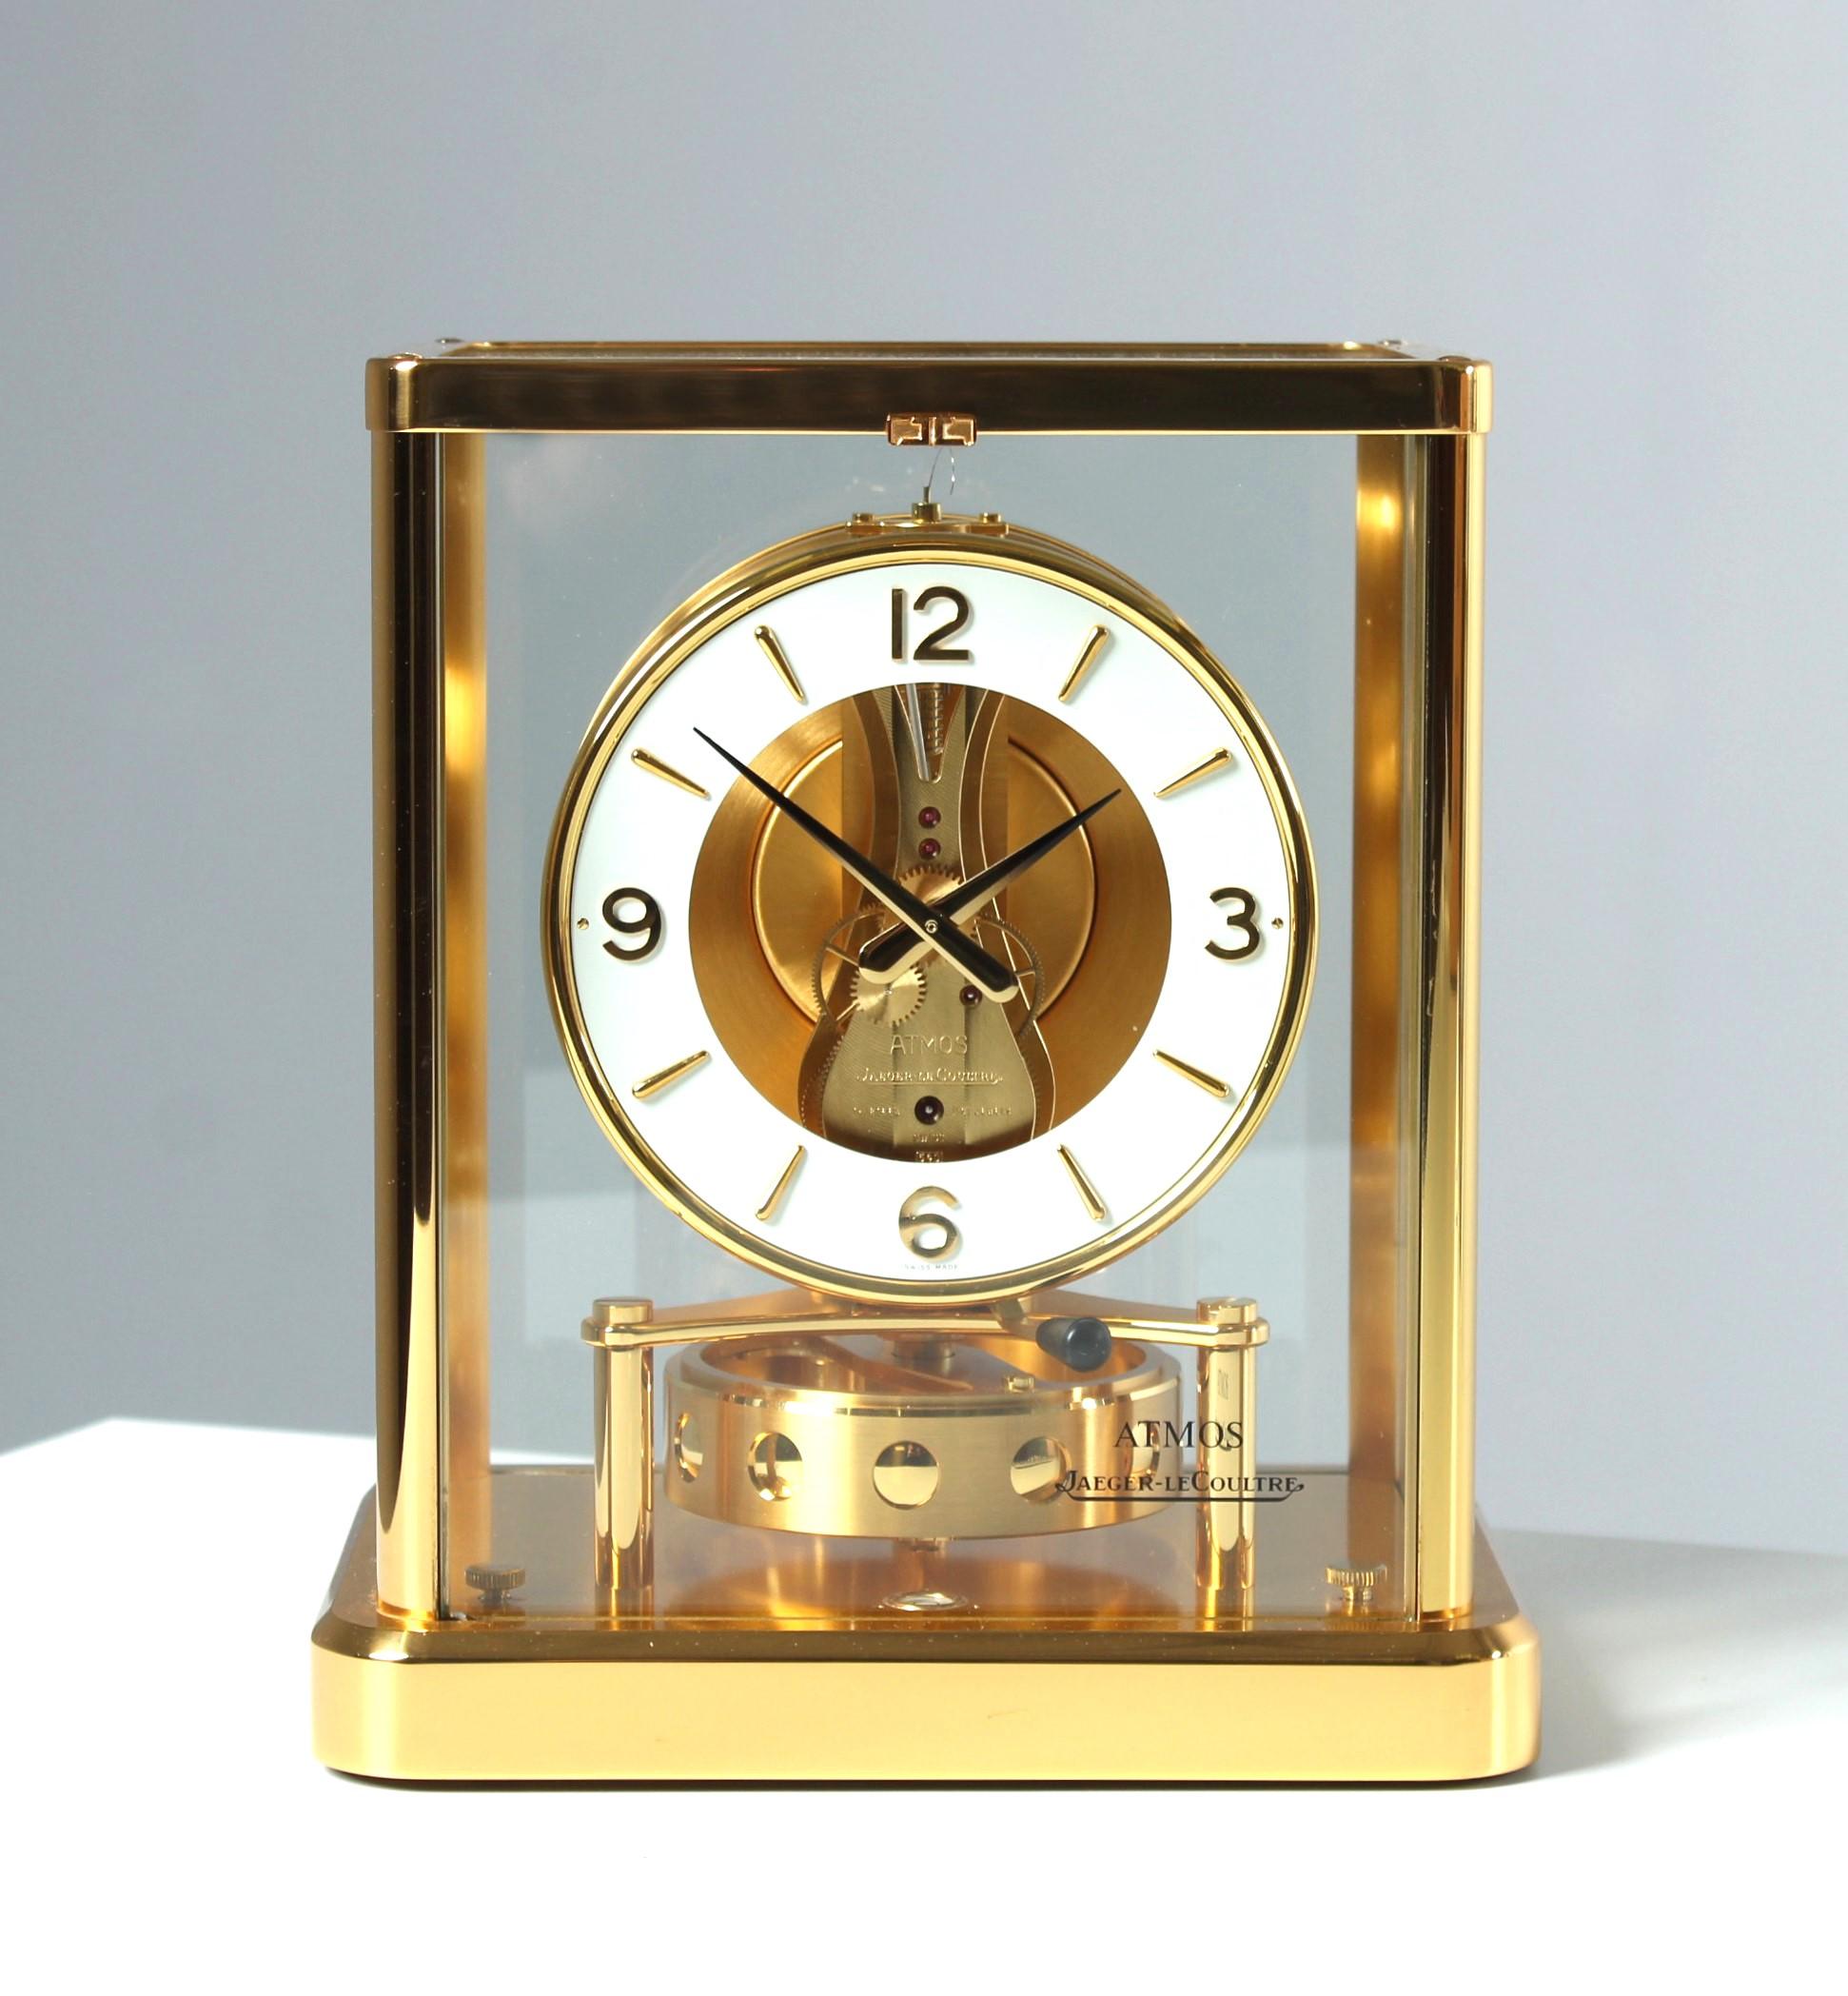 Jaeger LeCoultre Atmos Clock Cal. 540 in Full Set

Switzerland
Brass gold plated
Year of manufacture 1991

Dimensions: H x W x D: 23 x 20 x 15 cm

